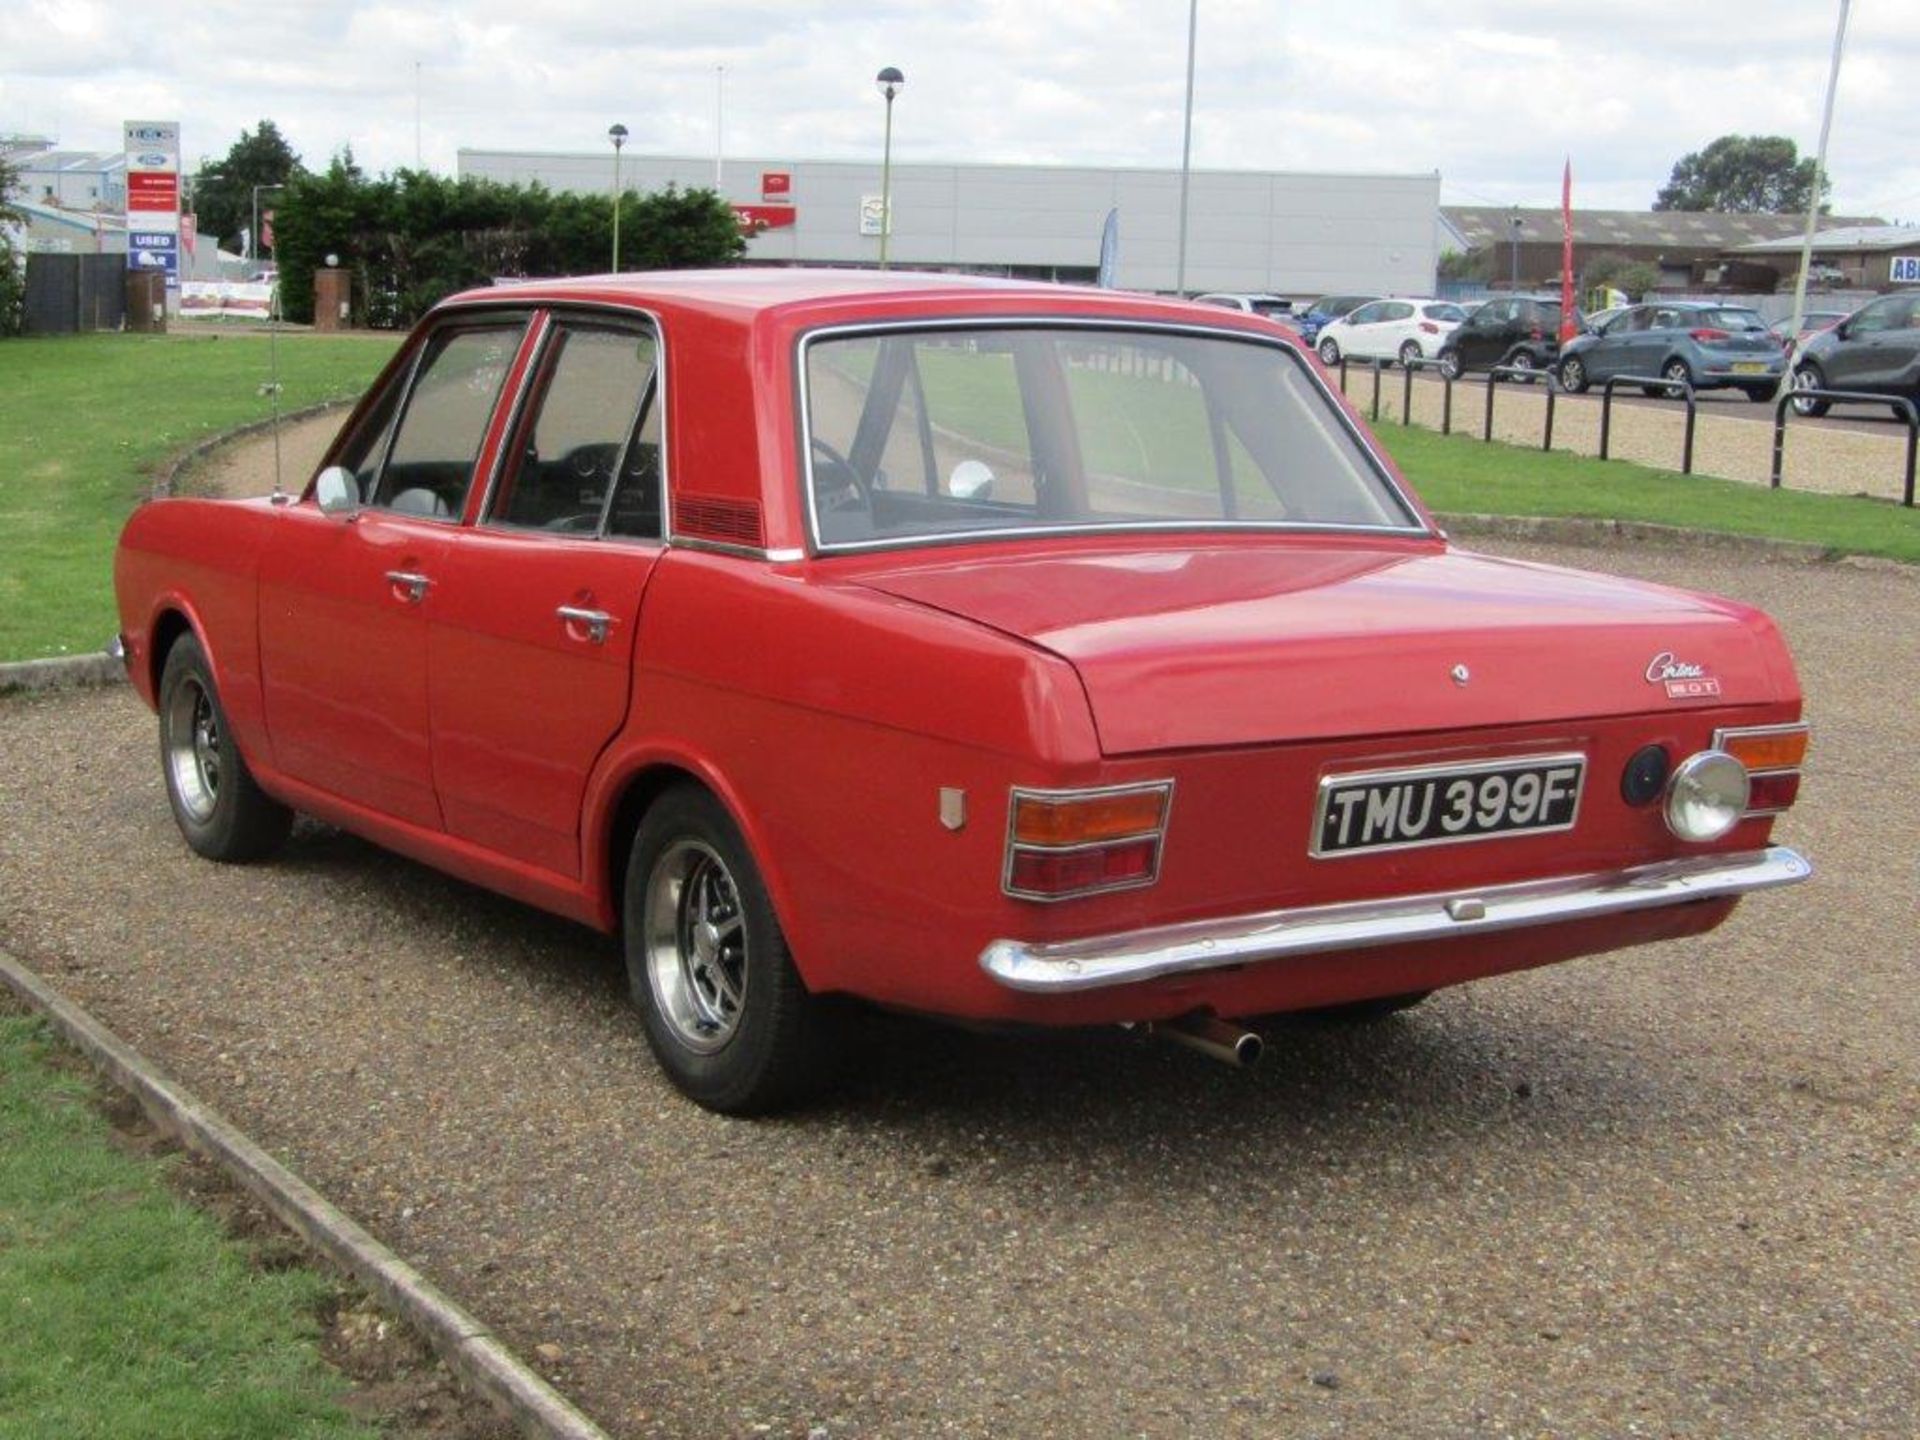 1968 Ford Cortina 1600 GT MKII - Image 4 of 11